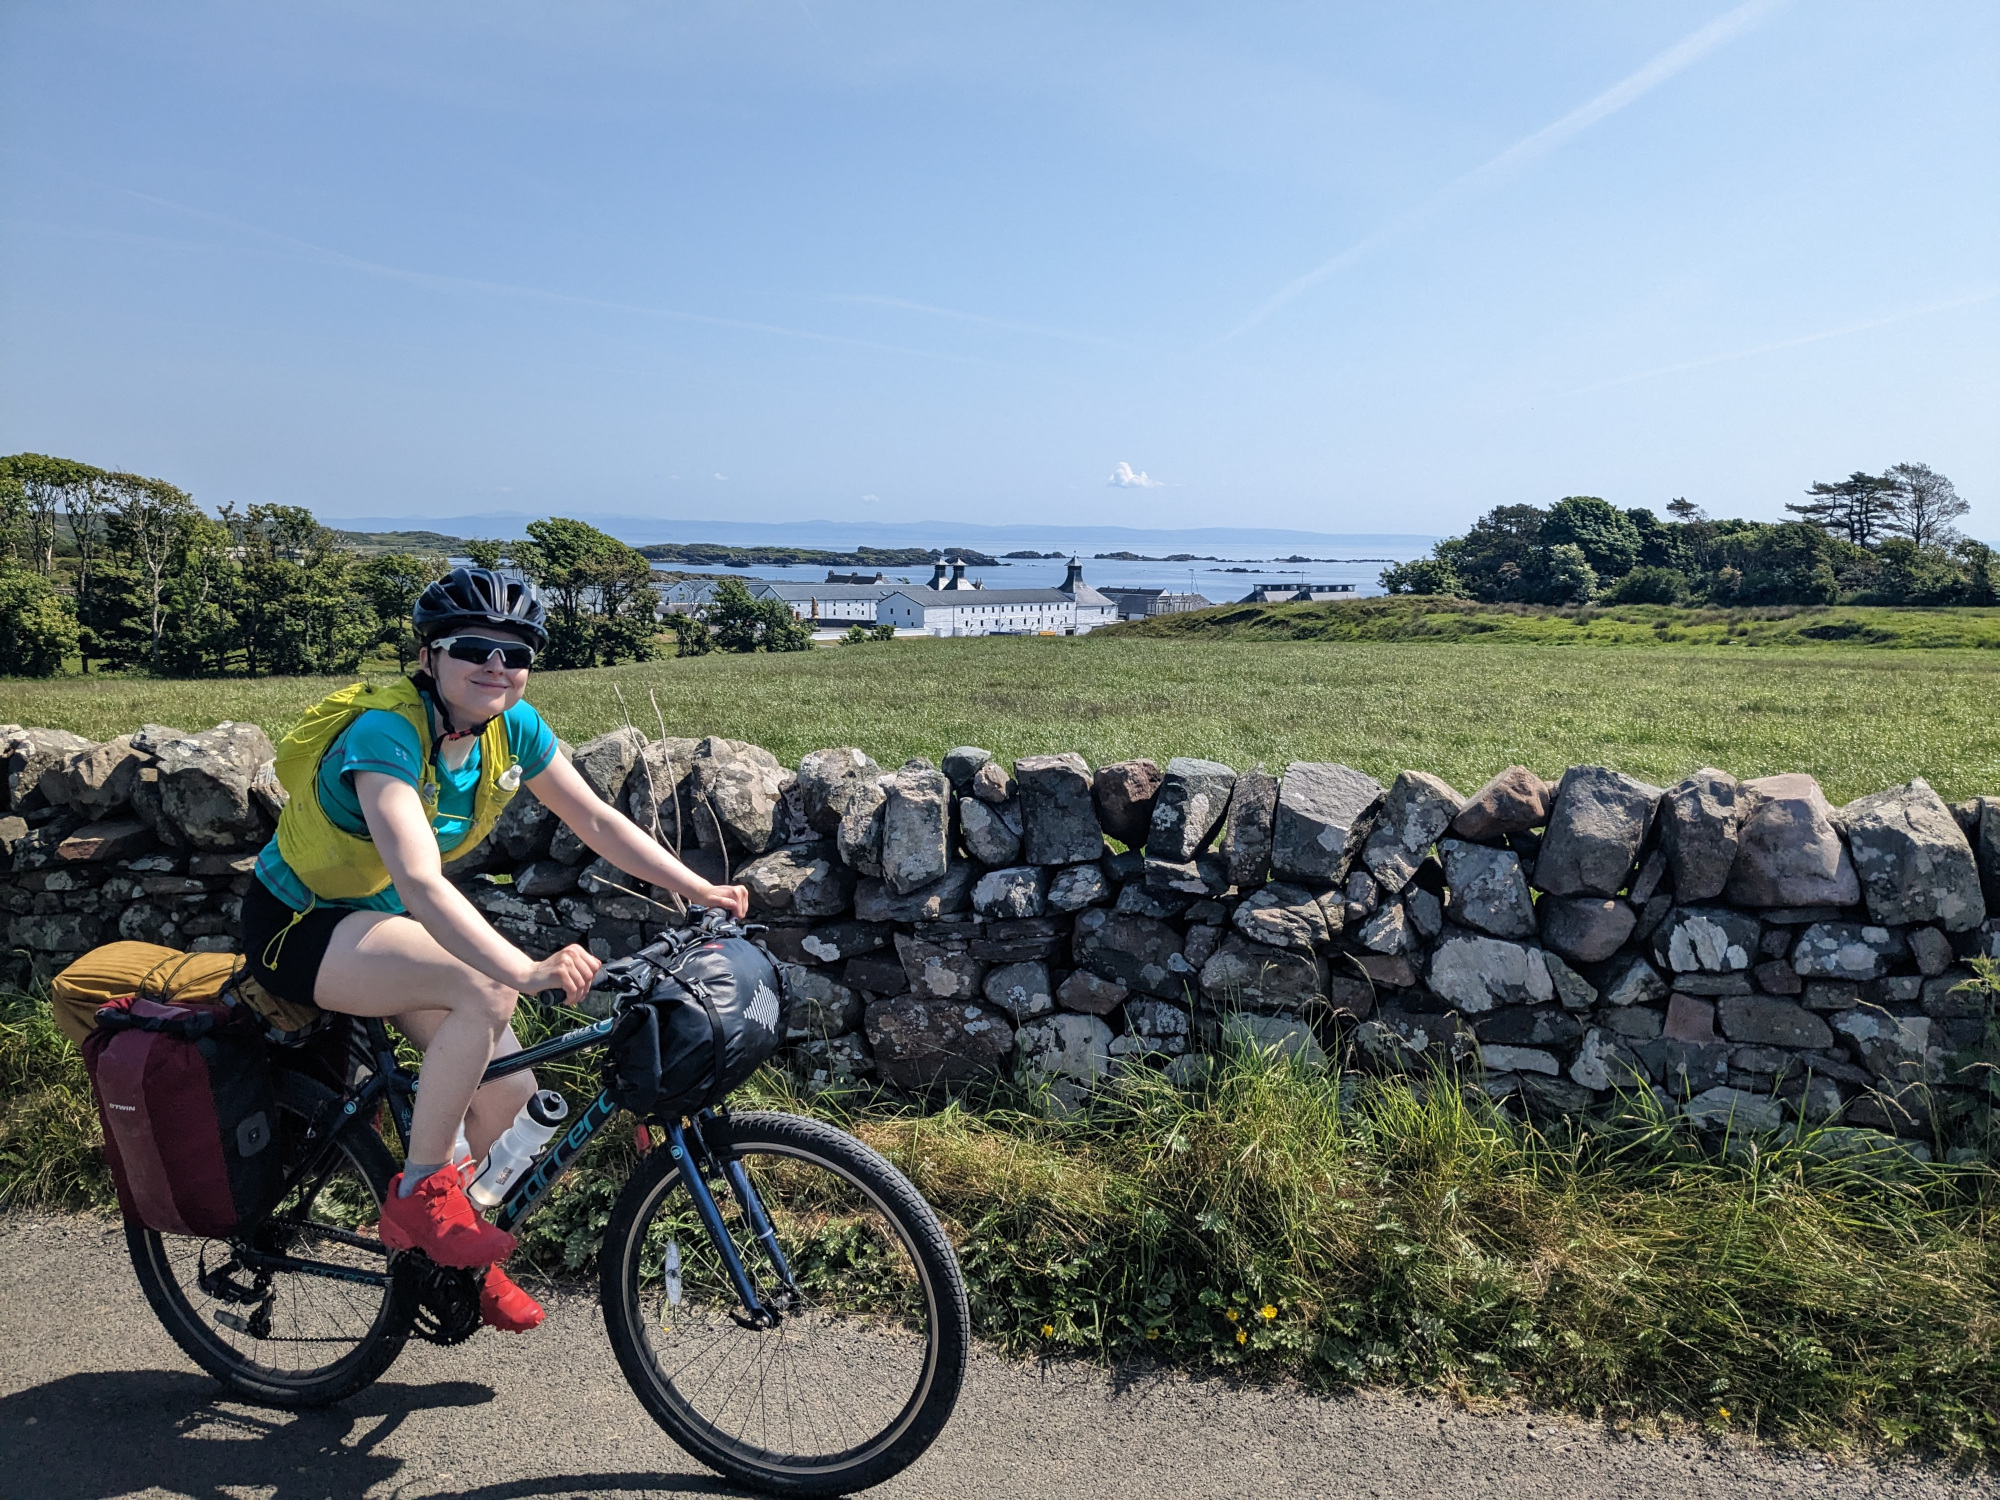 Faye cycling back from Ardbeg along the Three Distilleries path.